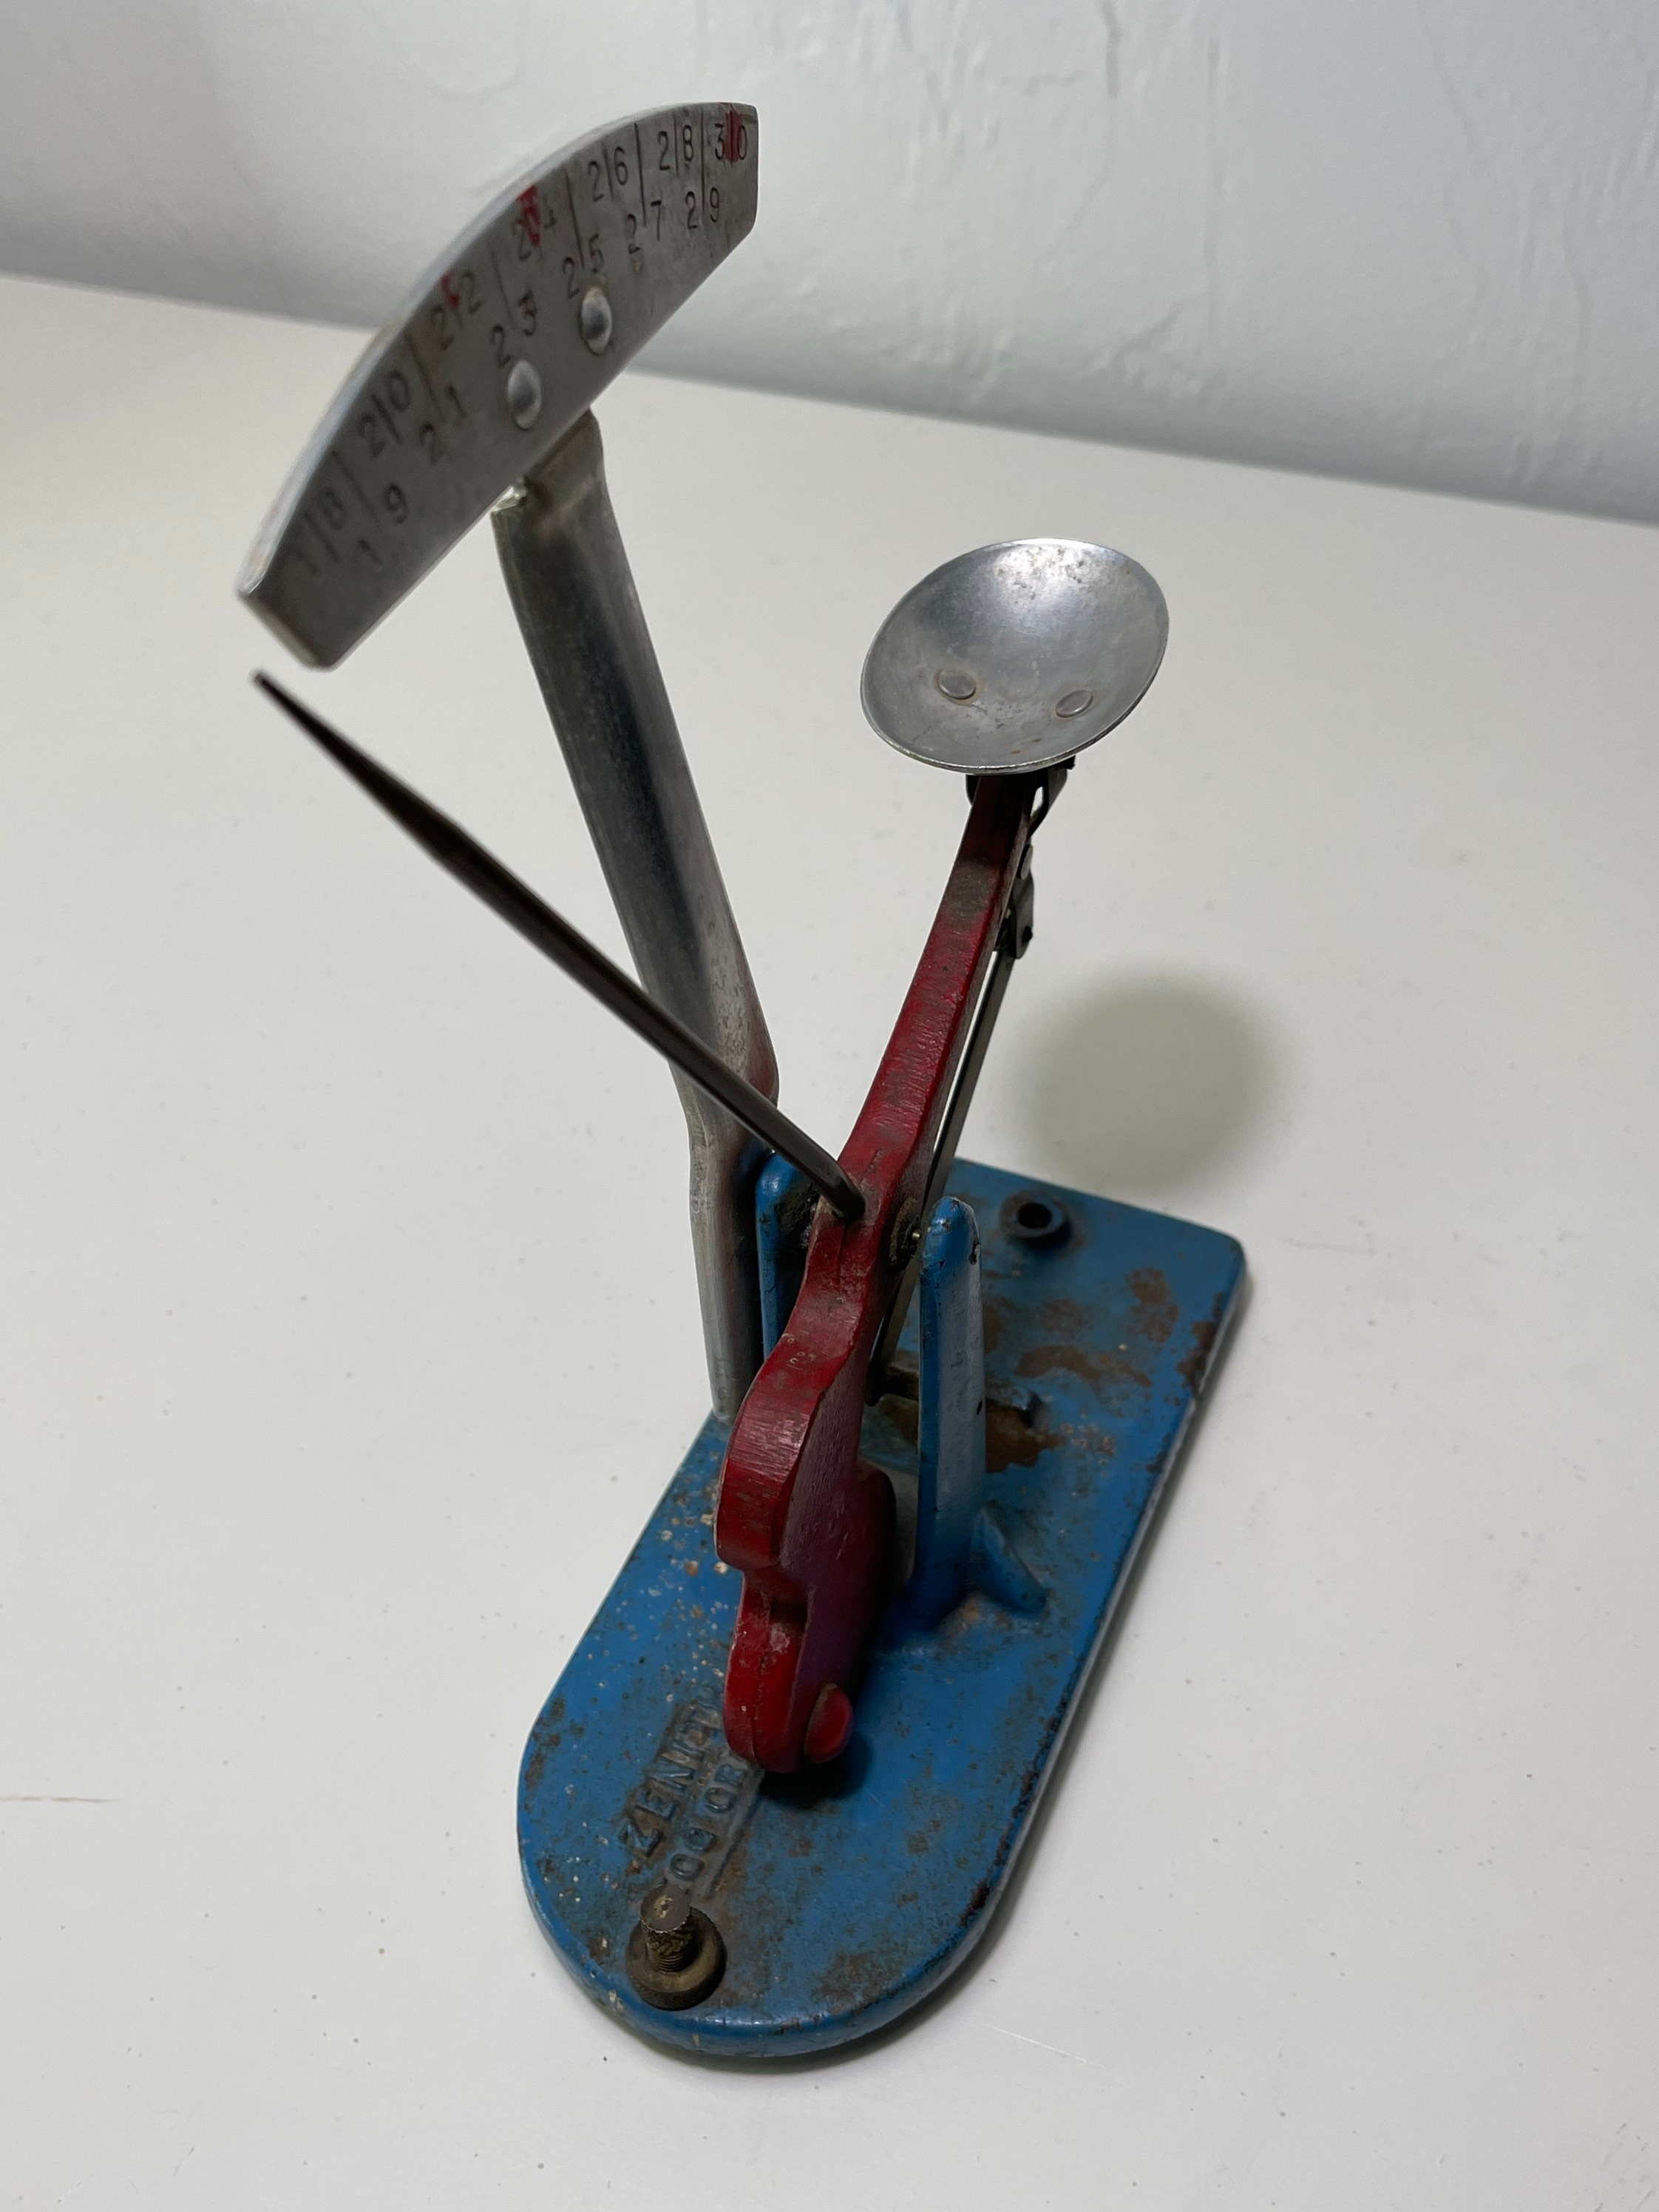 This vintage egg scale I found in my grandmother's basement :  r/mildlyinteresting